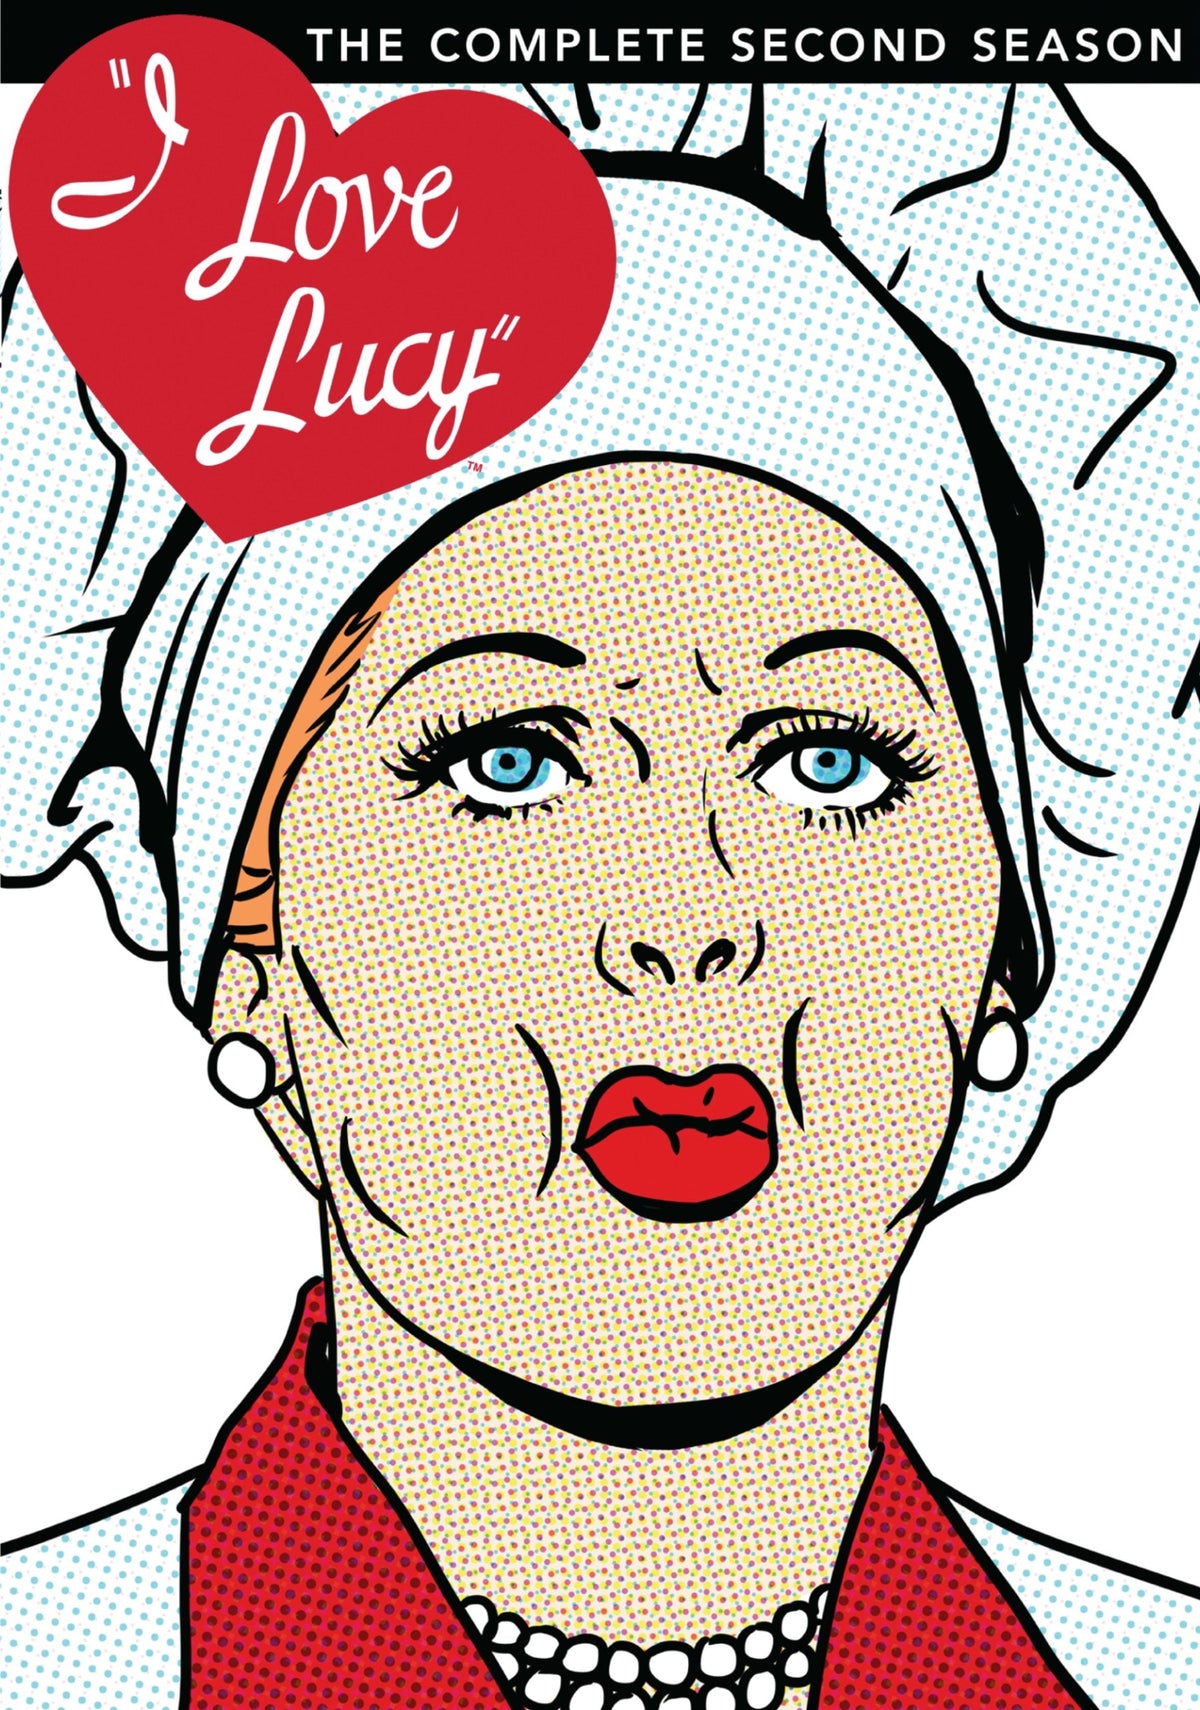 I Love Lucy: The Complete Second Season DVD